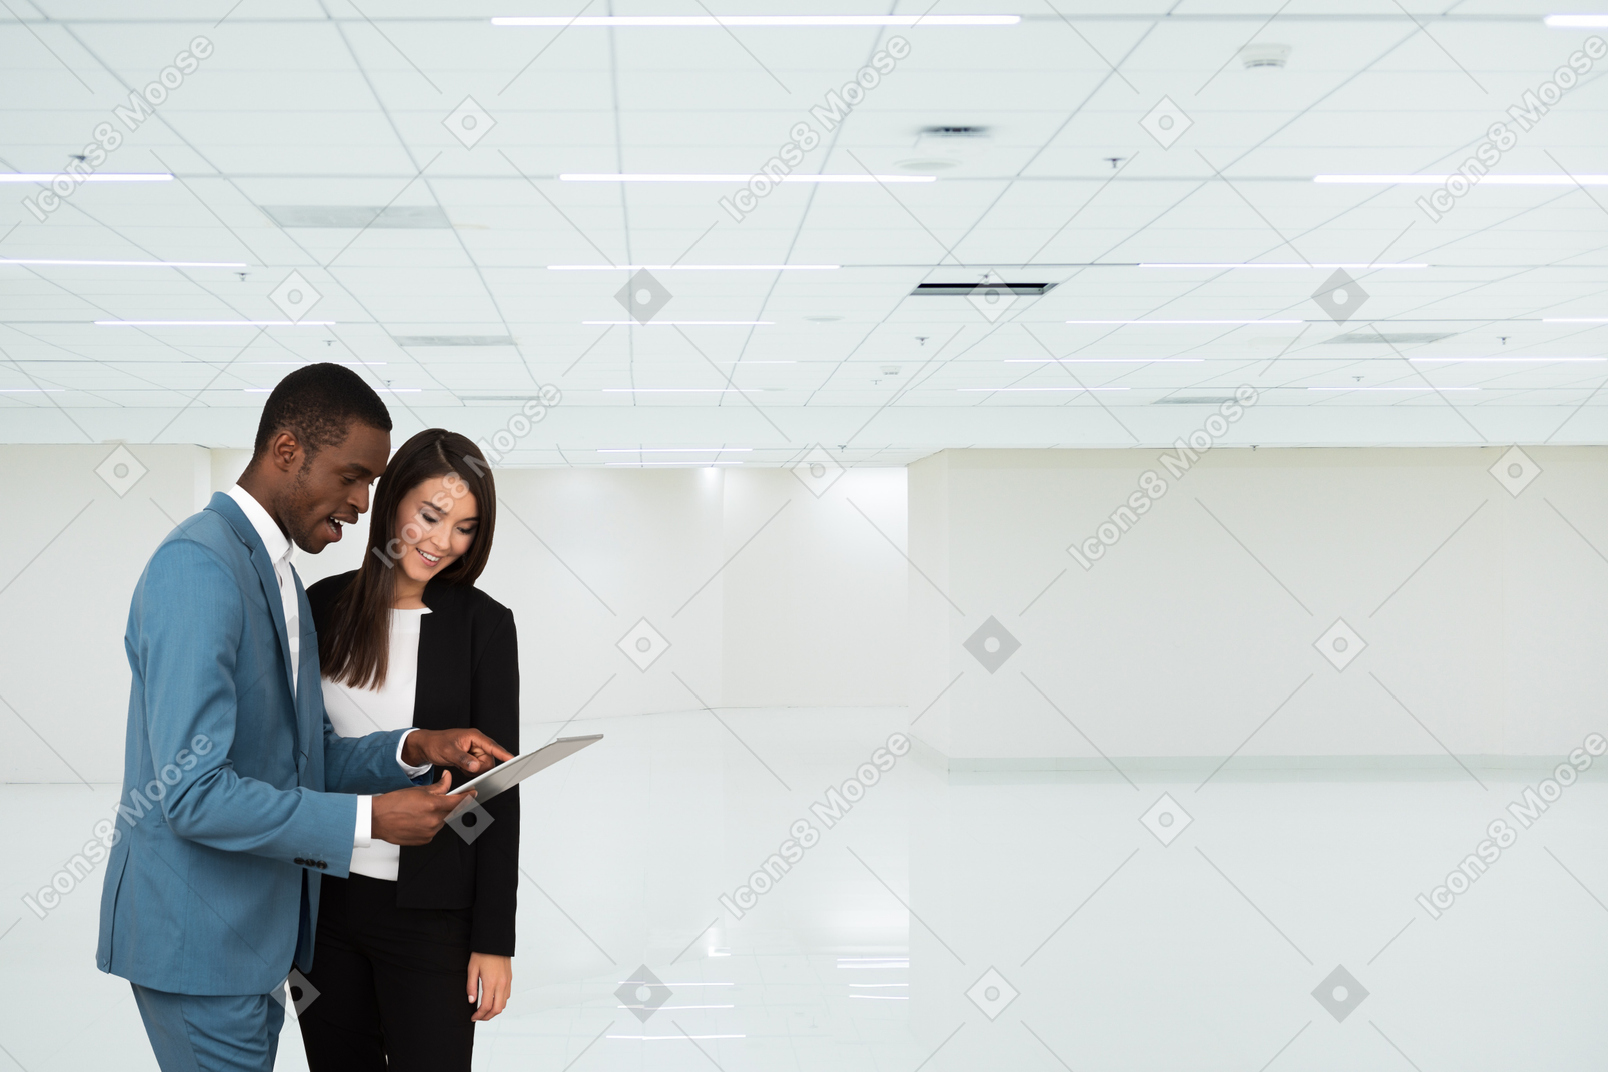 A man and a woman looking at a tablet